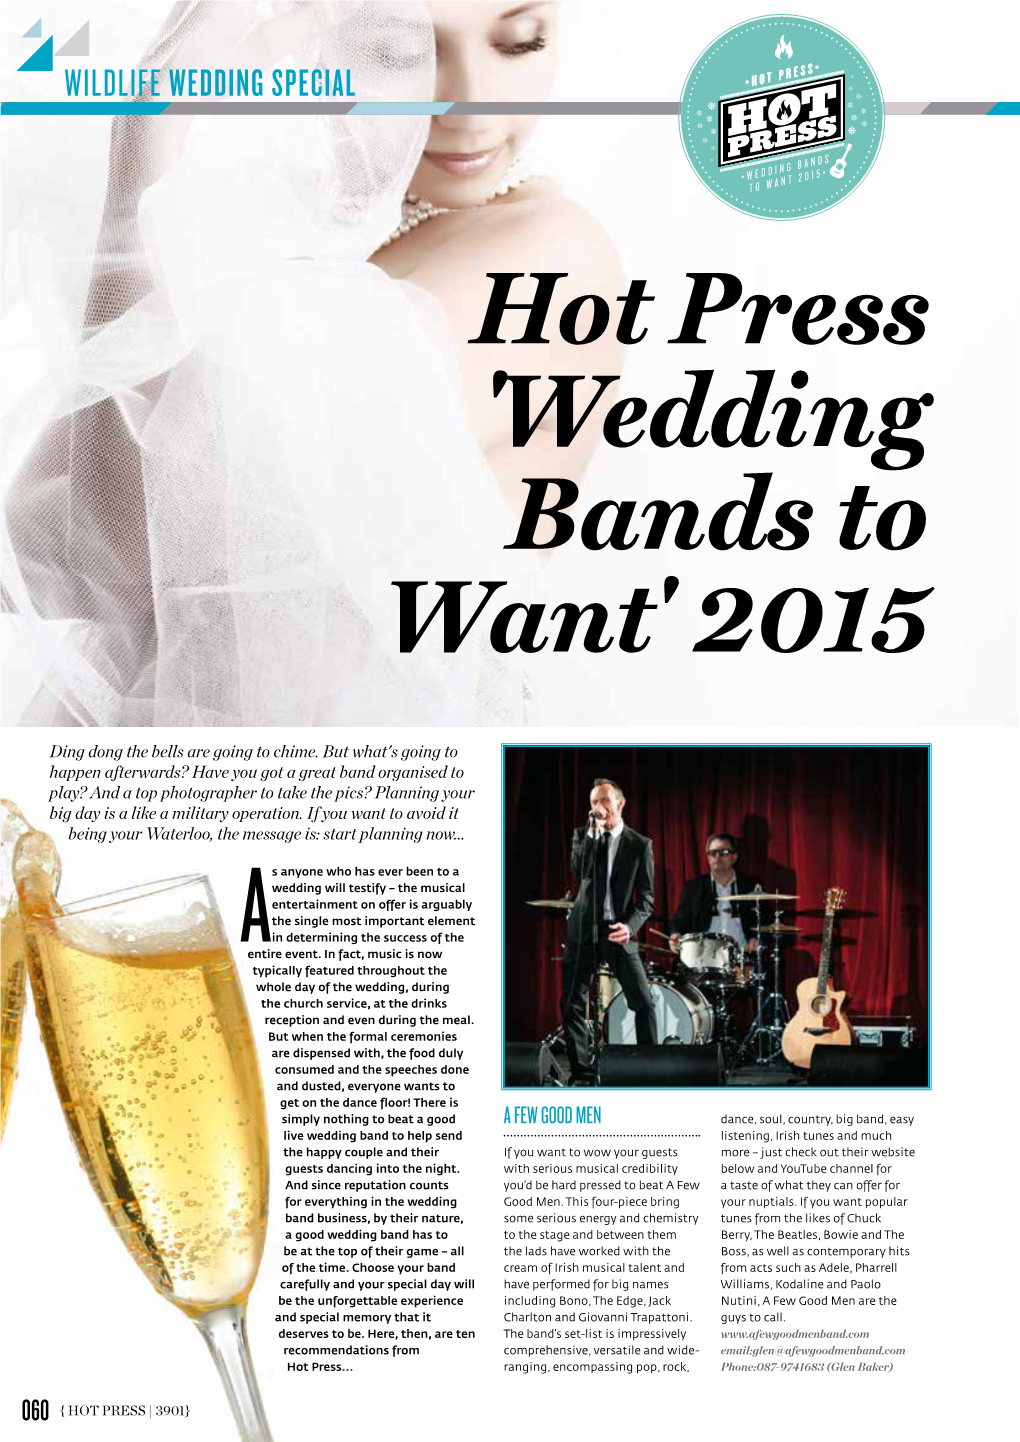 Hot Press 'Wedding Bands to Want' 2015